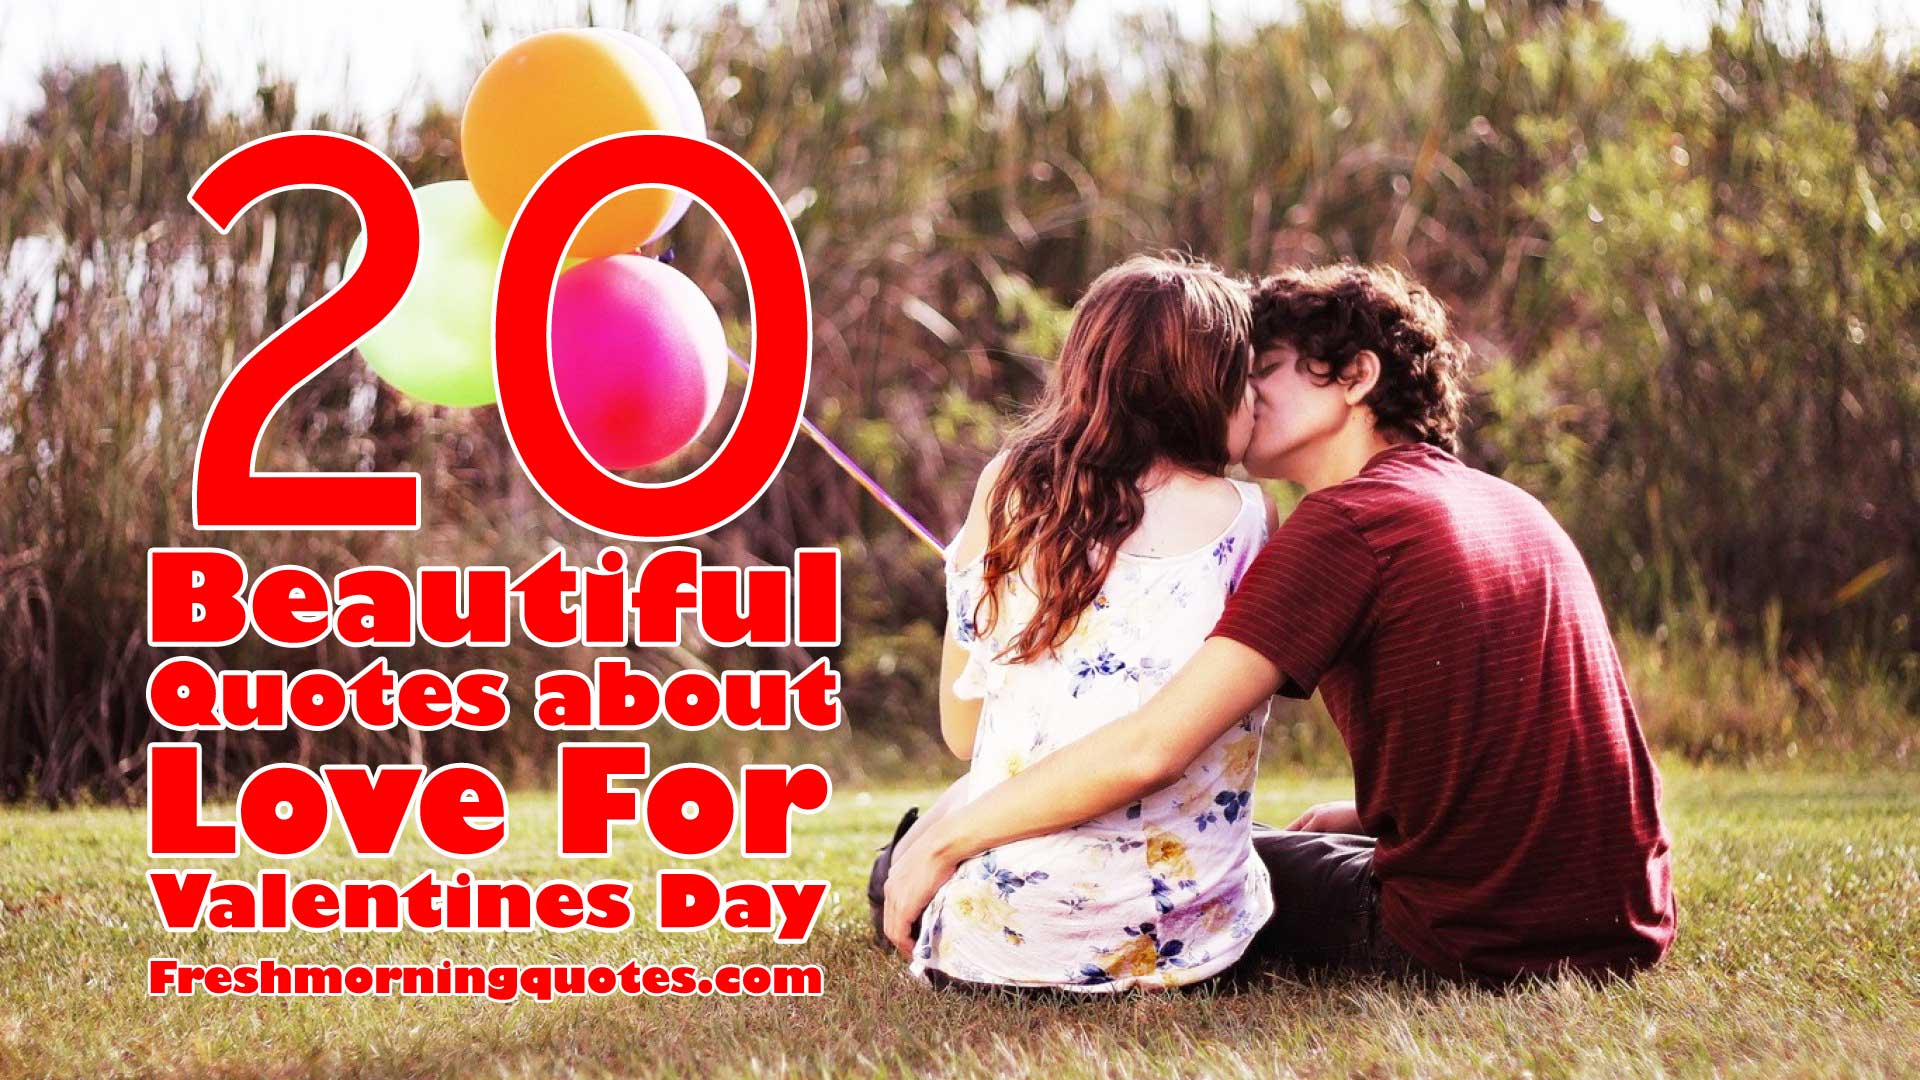 20 Beautiful Quotes about Love for Valentines Day - Freshmorningquotes